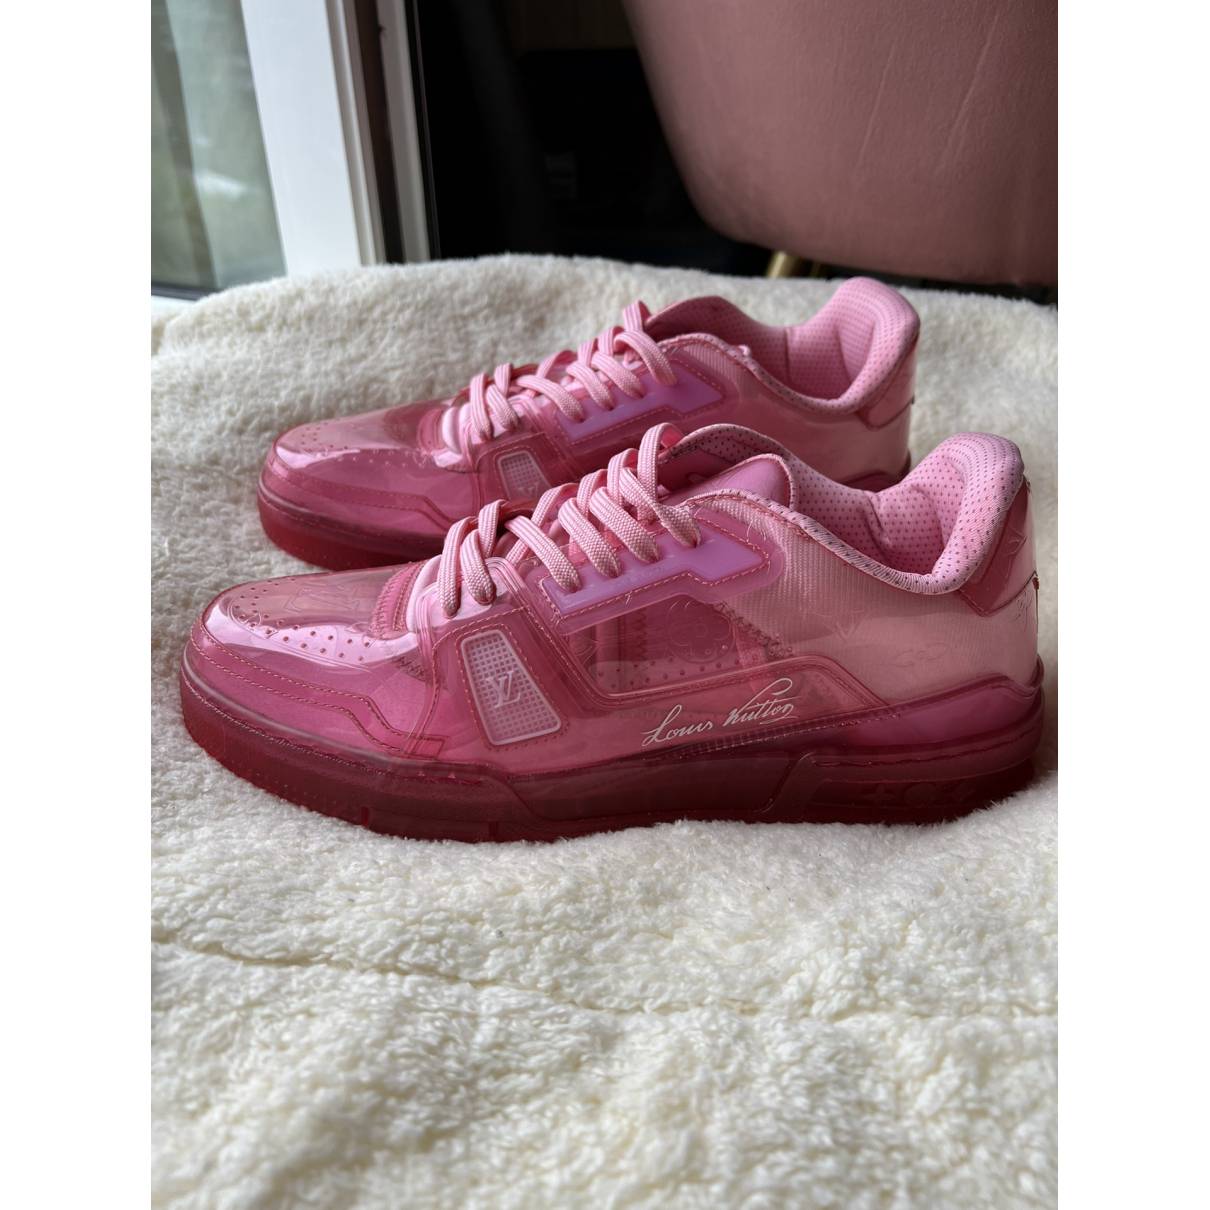 Lv trainer leather low trainers Louis Vuitton Pink size 7.5 UK in